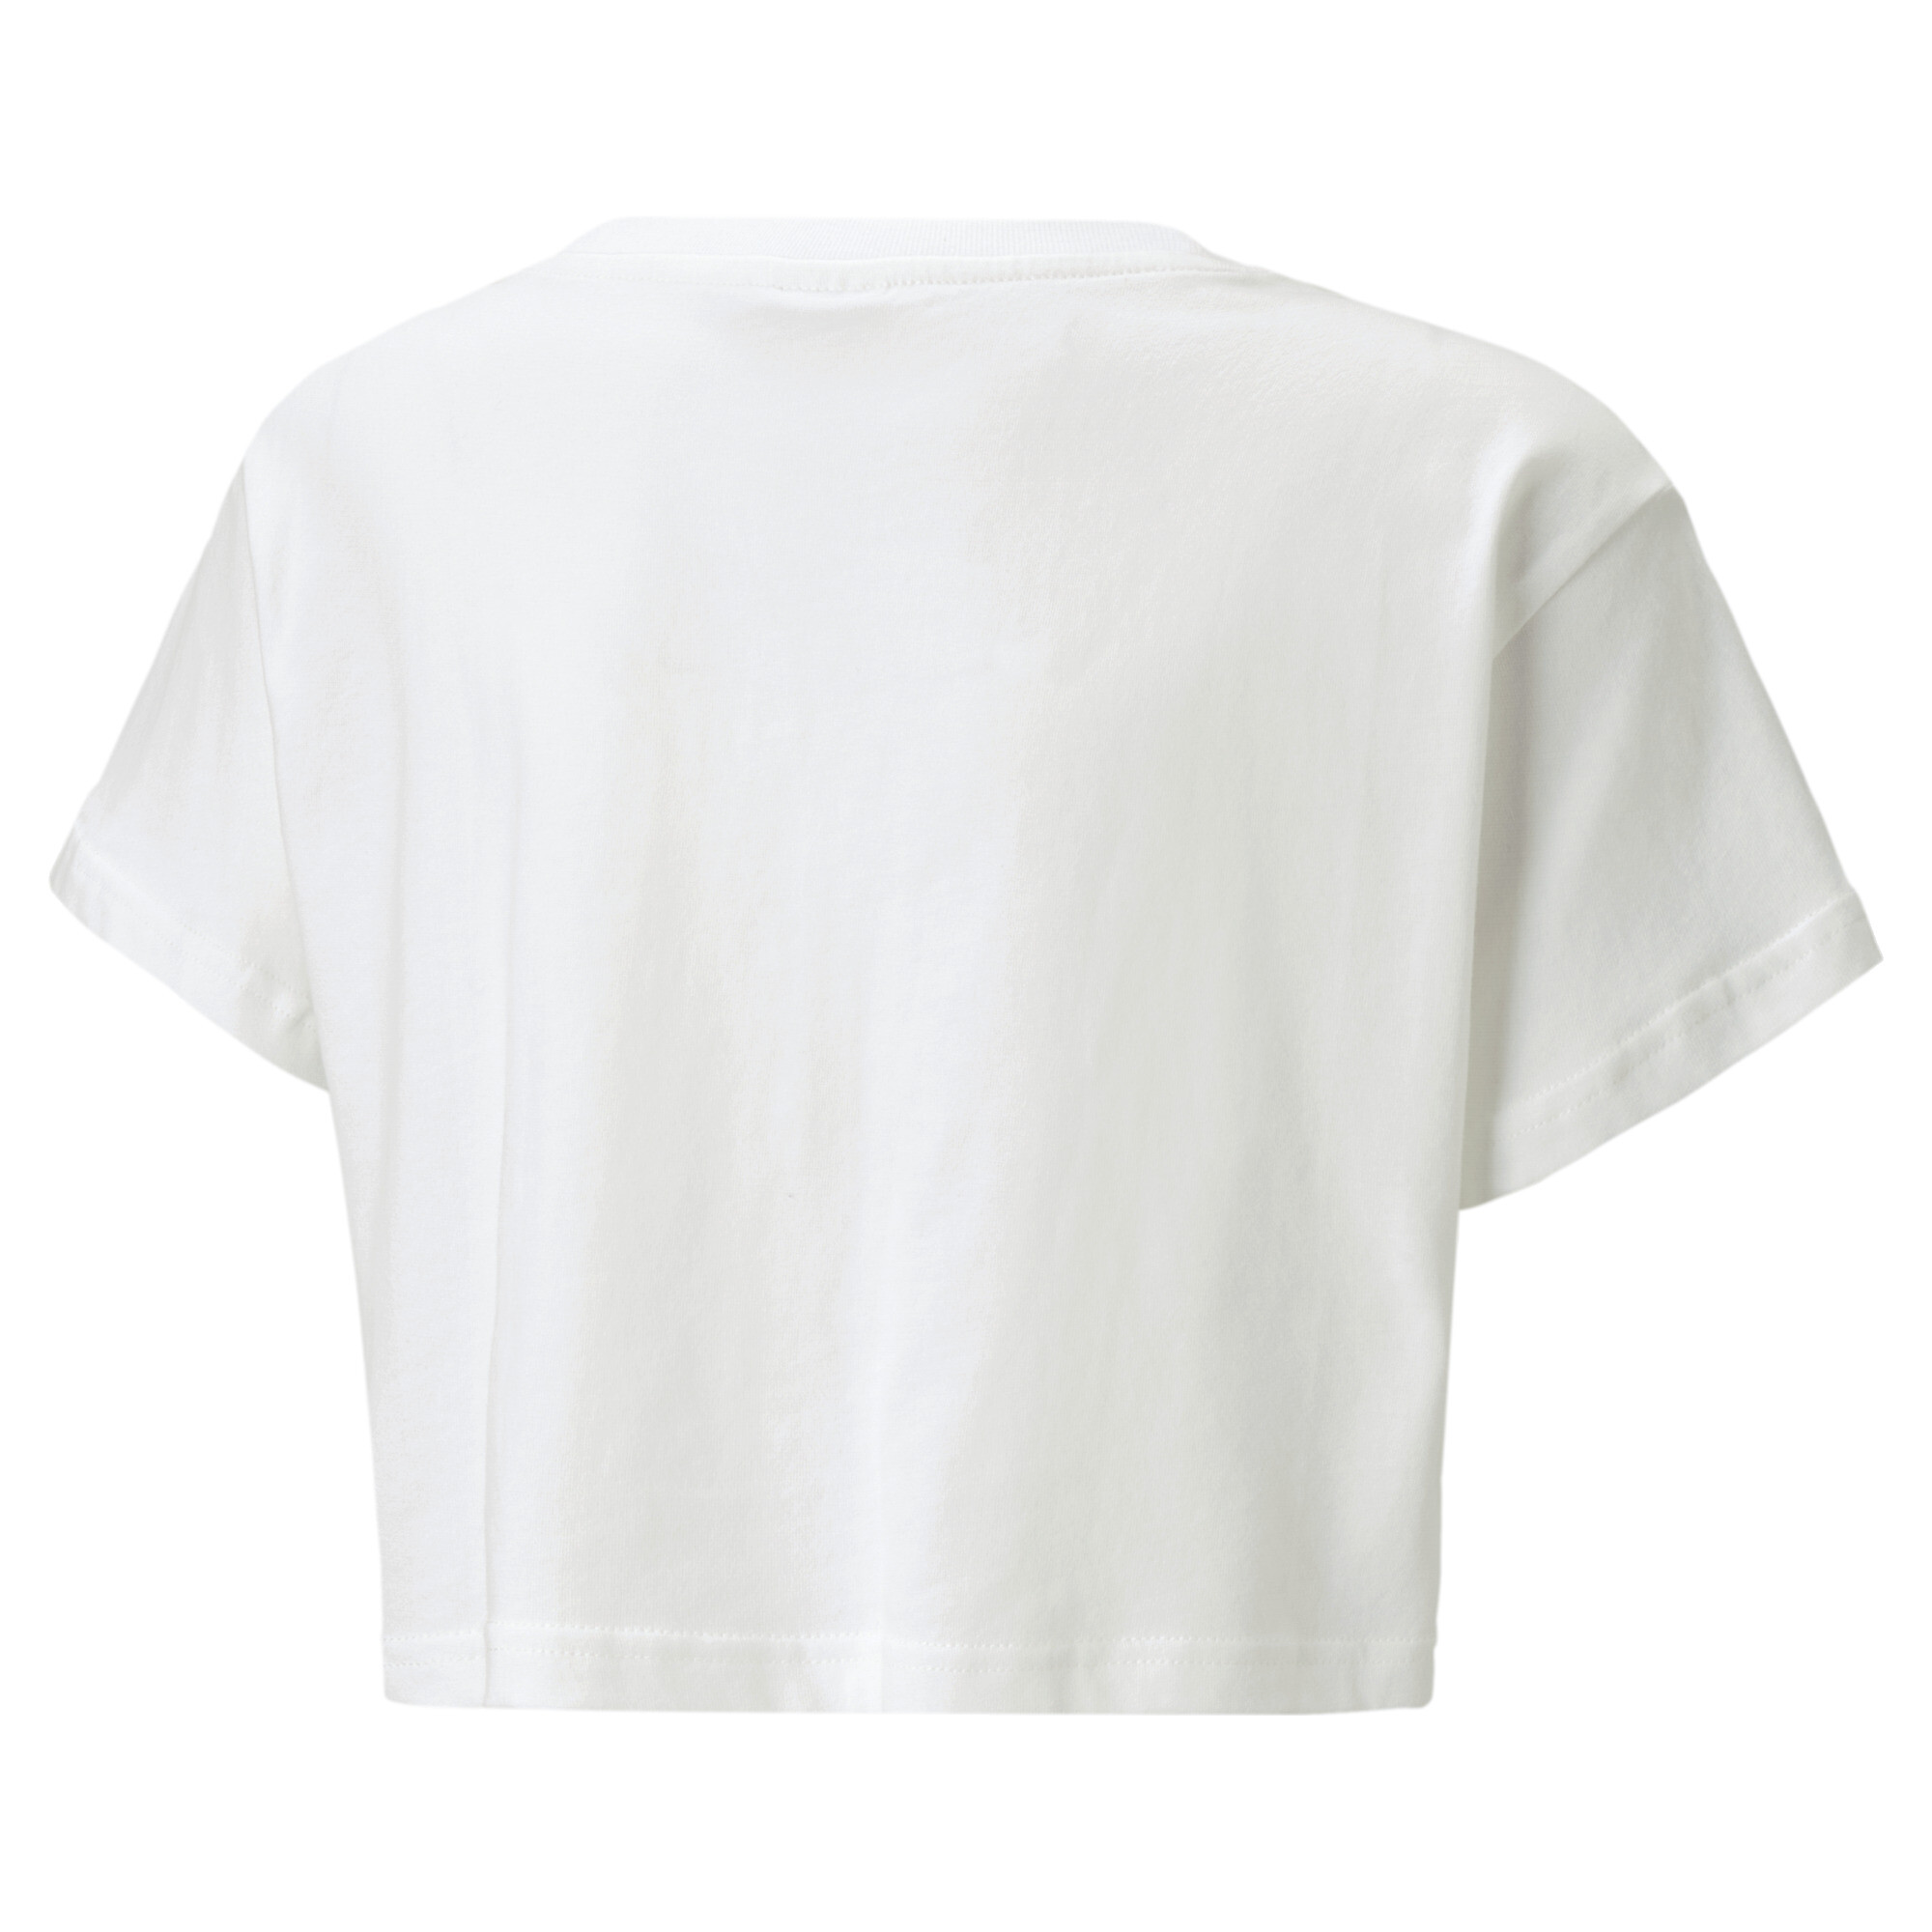 PUMA Classics T-Shirt In 20 - White, Size 7-8 Youth